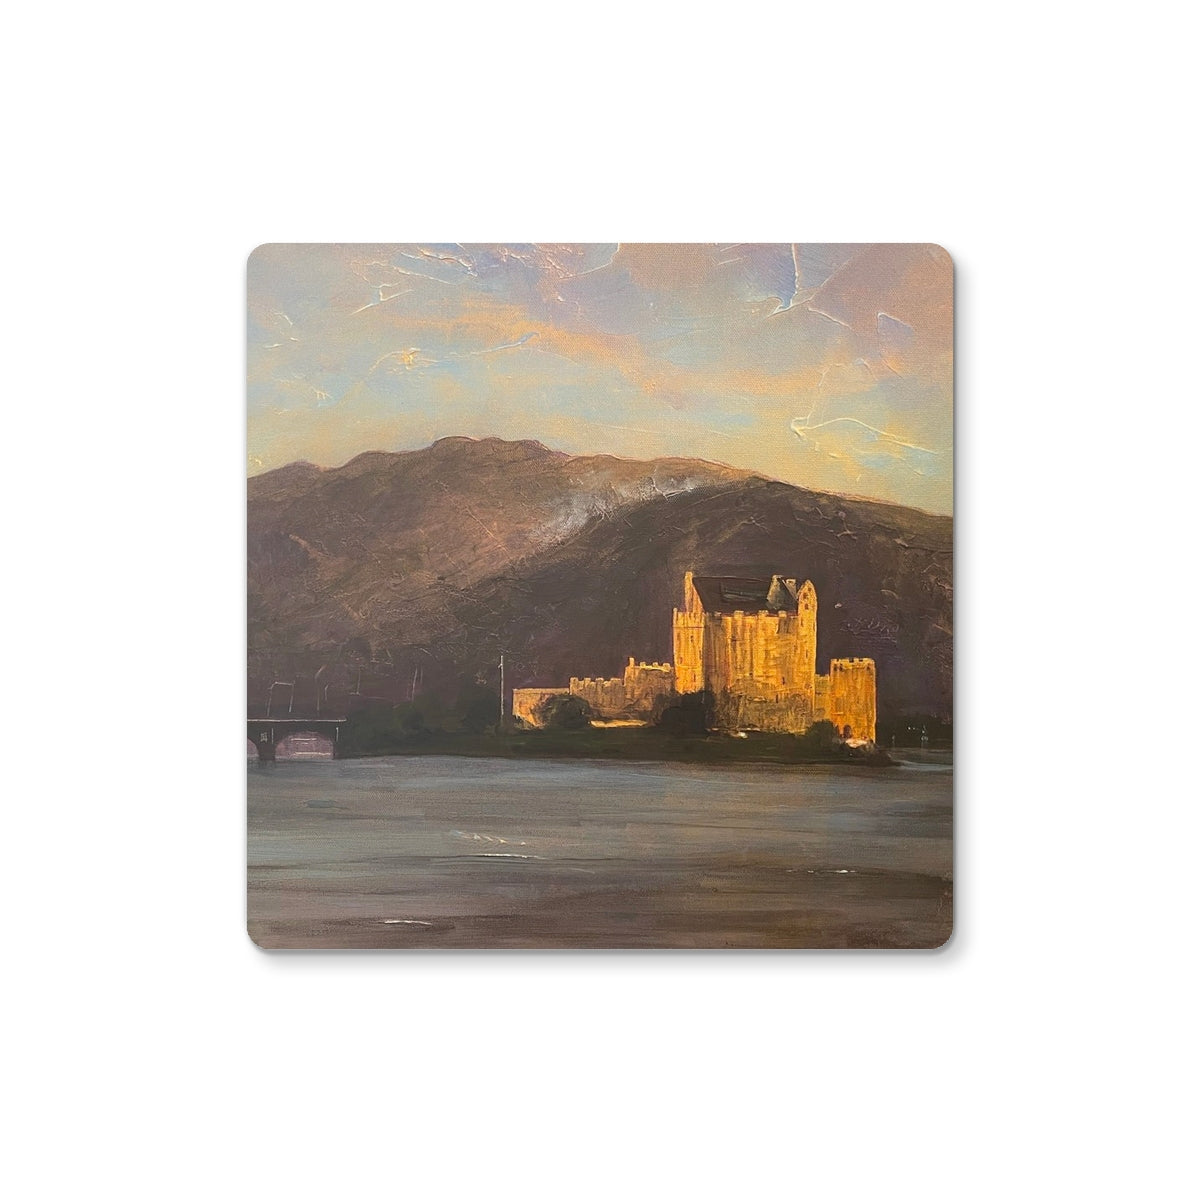 Eilean Donan Castle Art Gifts Coaster-Coasters-Historic & Iconic Scotland Art Gallery-6 Coasters-Paintings, Prints, Homeware, Art Gifts From Scotland By Scottish Artist Kevin Hunter